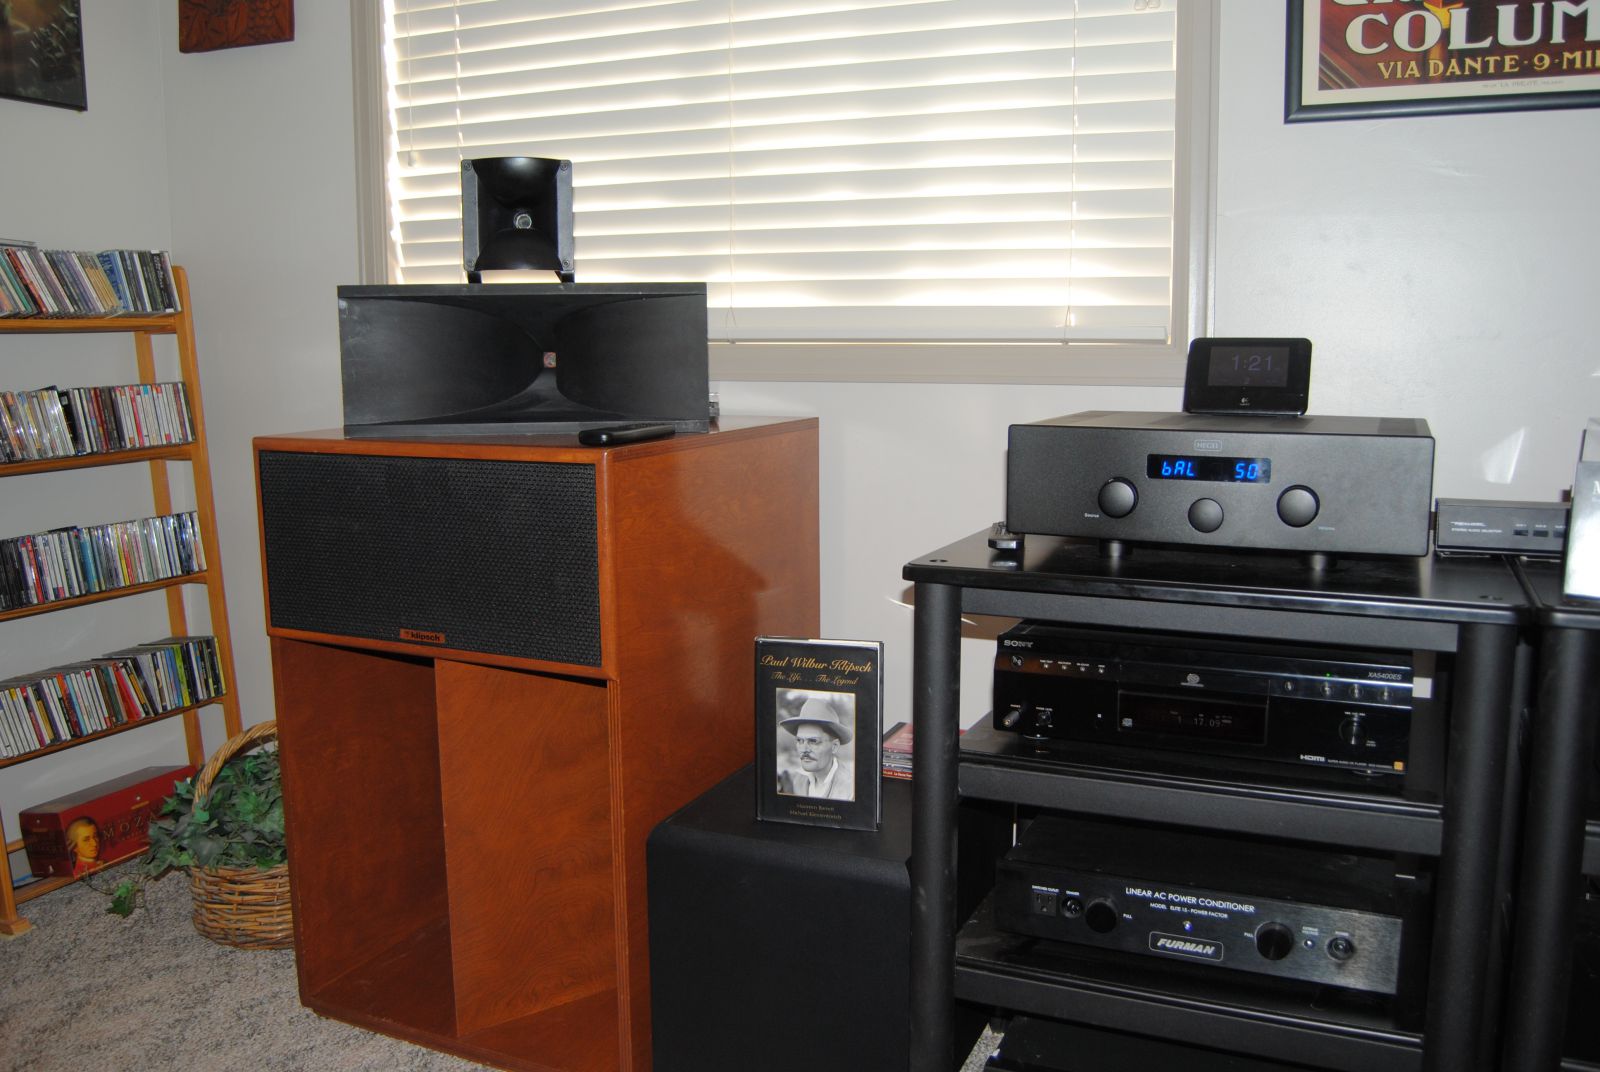 From the listening chair - yes, that's a Klipsch sub as well